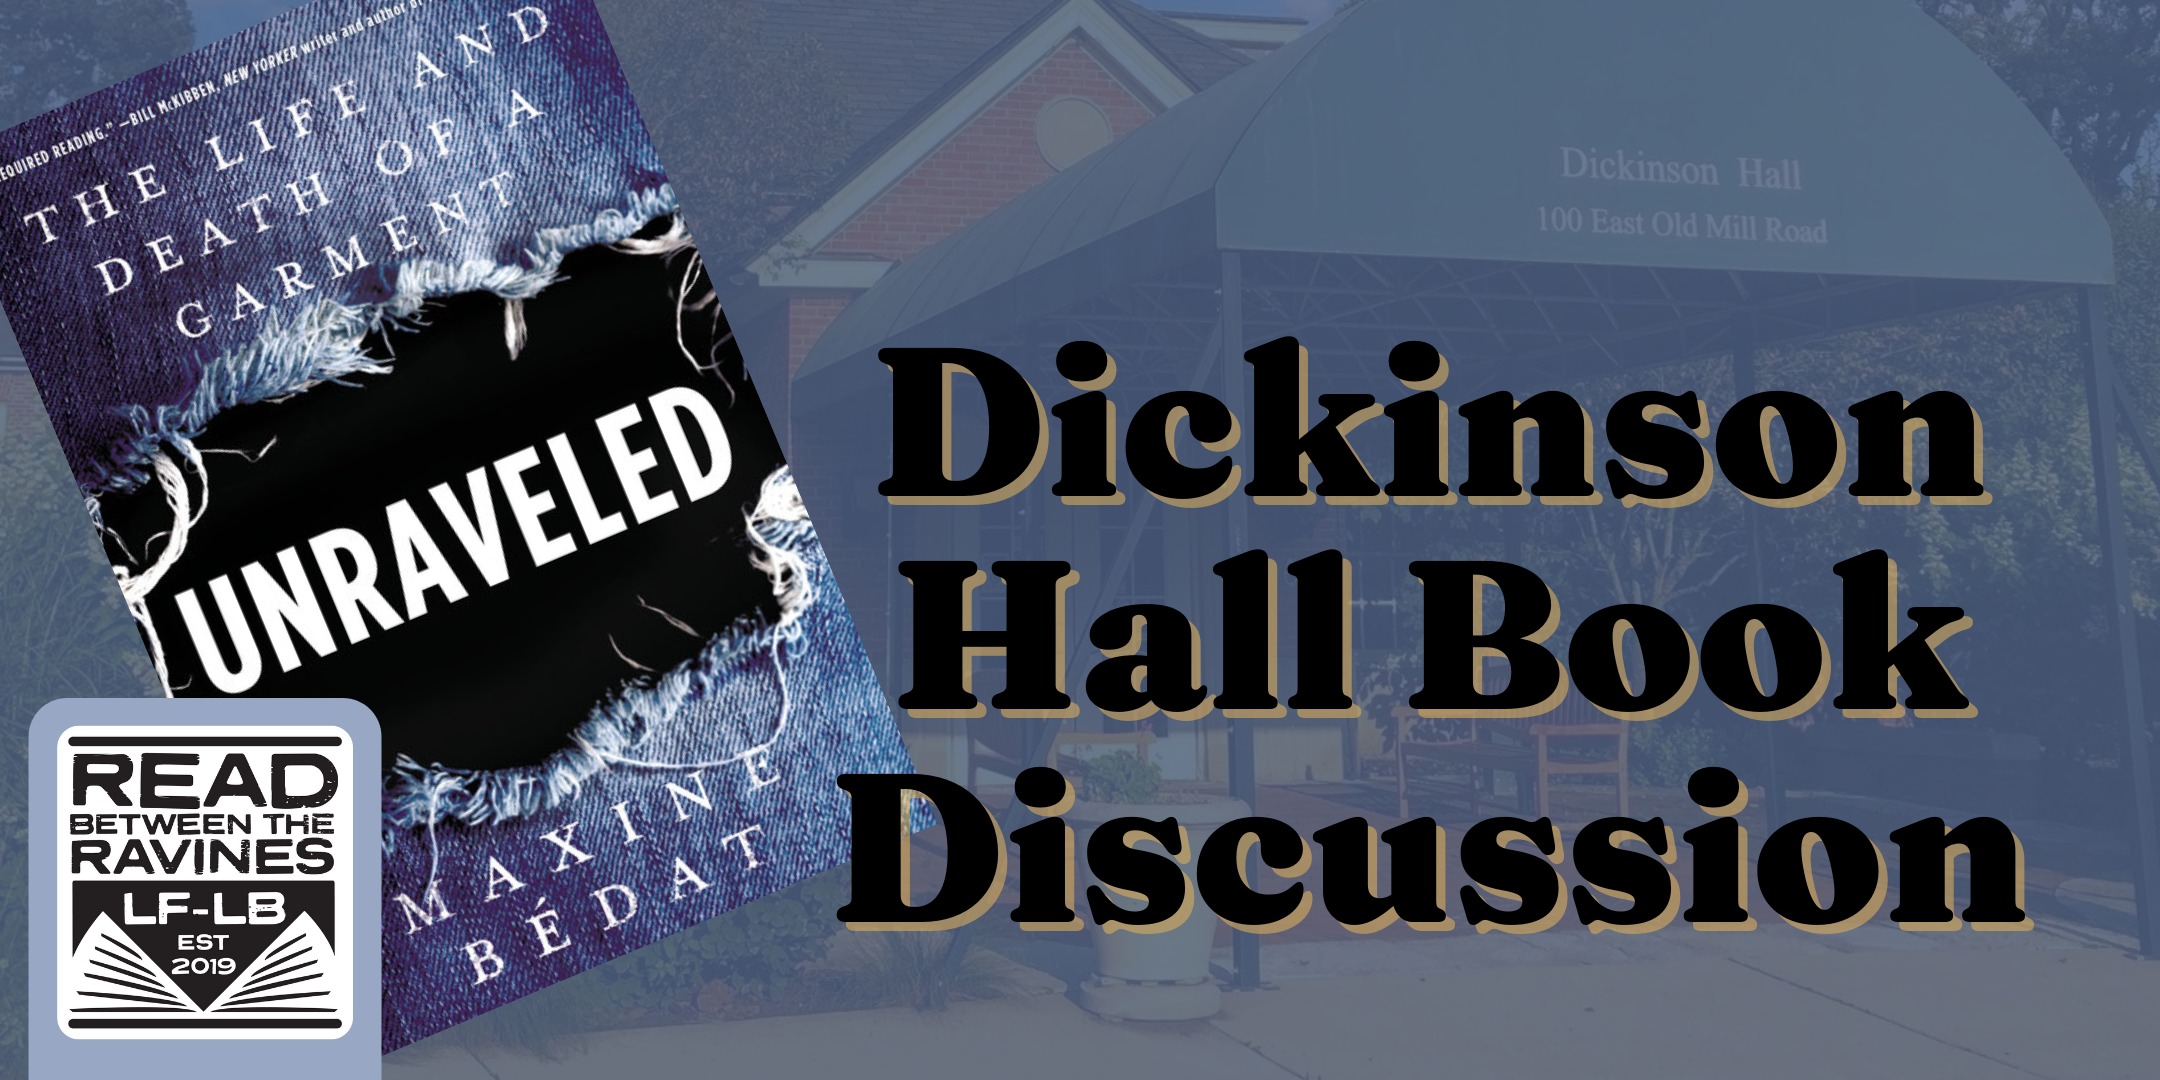 Dickinson Hall Book Discussion event image